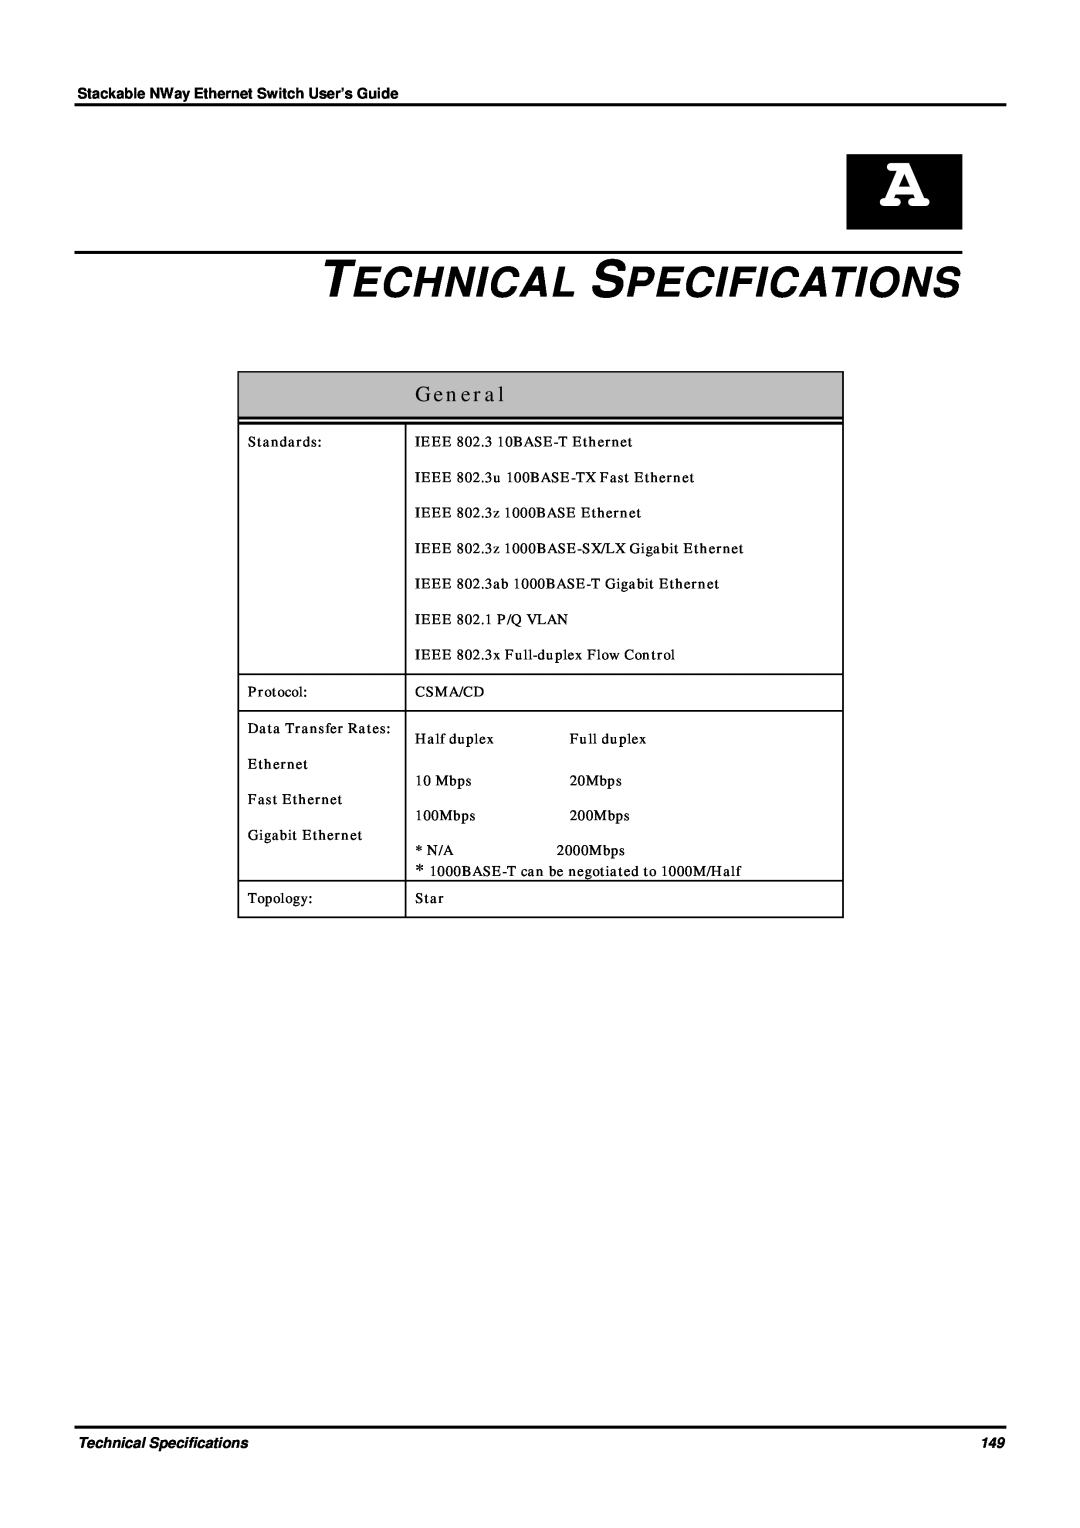 D-Link DES-3624 manual Technical Specifications, General, Stackable NWay Ethernet Switch User’s Guide 